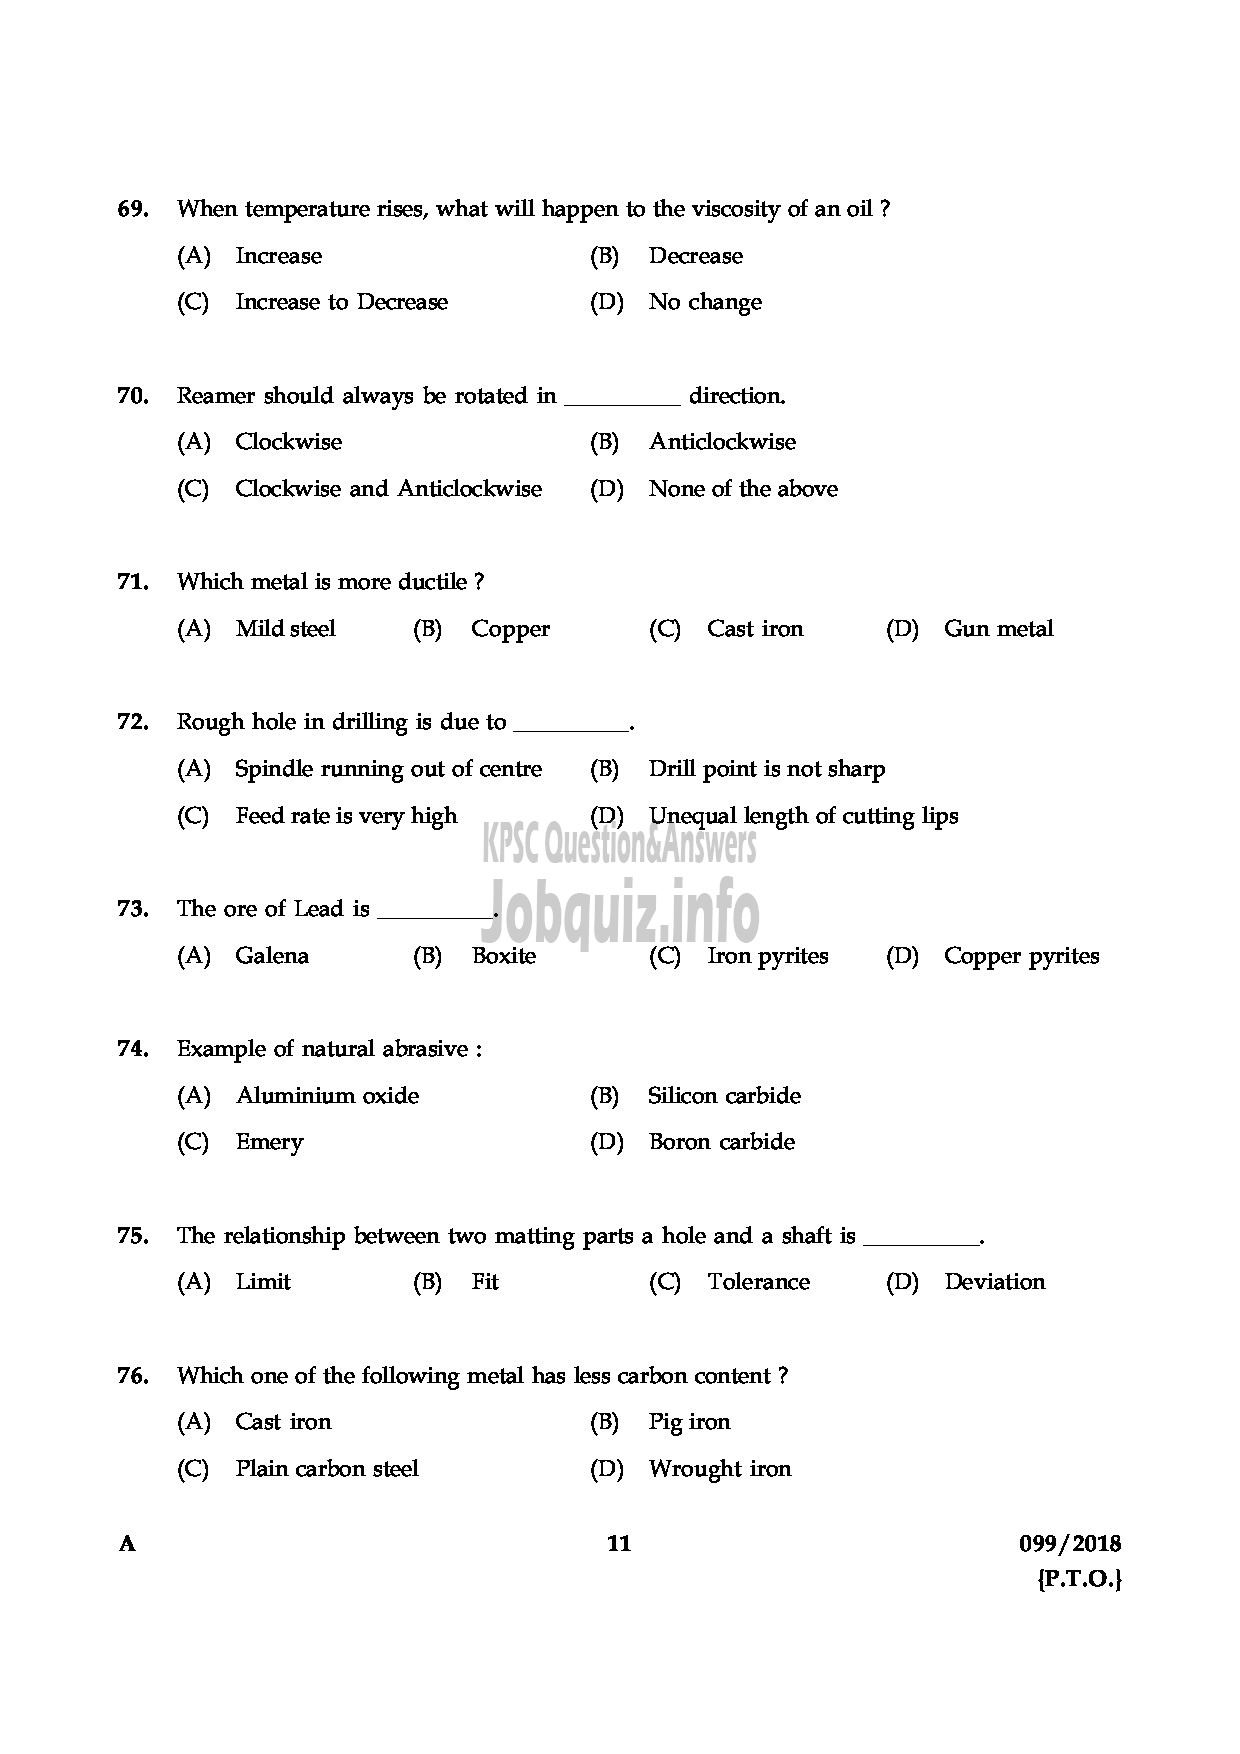 Kerala PSC Question Paper - JUNIOR INSTRUCTOR FITTER INDUSTRIAL TRAINING ENGLISH -11